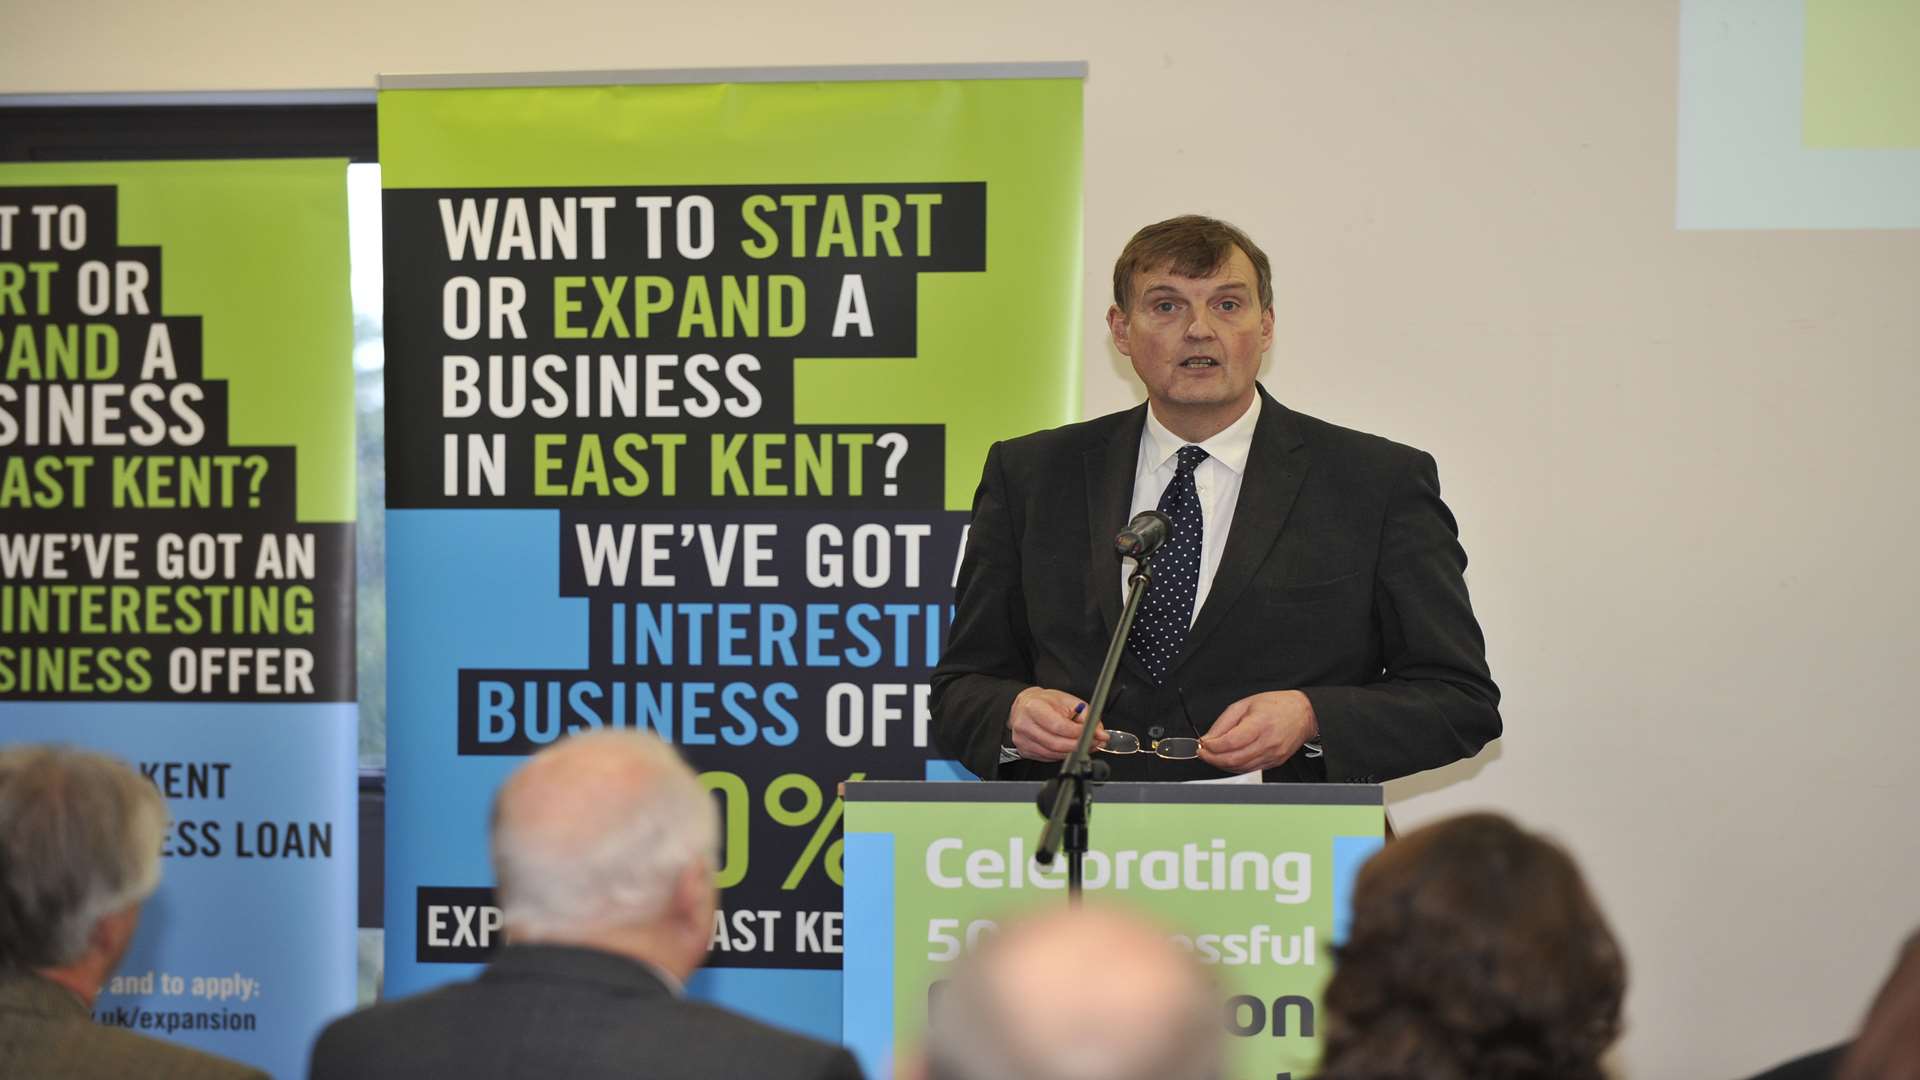 KCC leader Paul Carter speaking at an event celebrating that Expansion East Kent scheme had lent to more than 50 companies